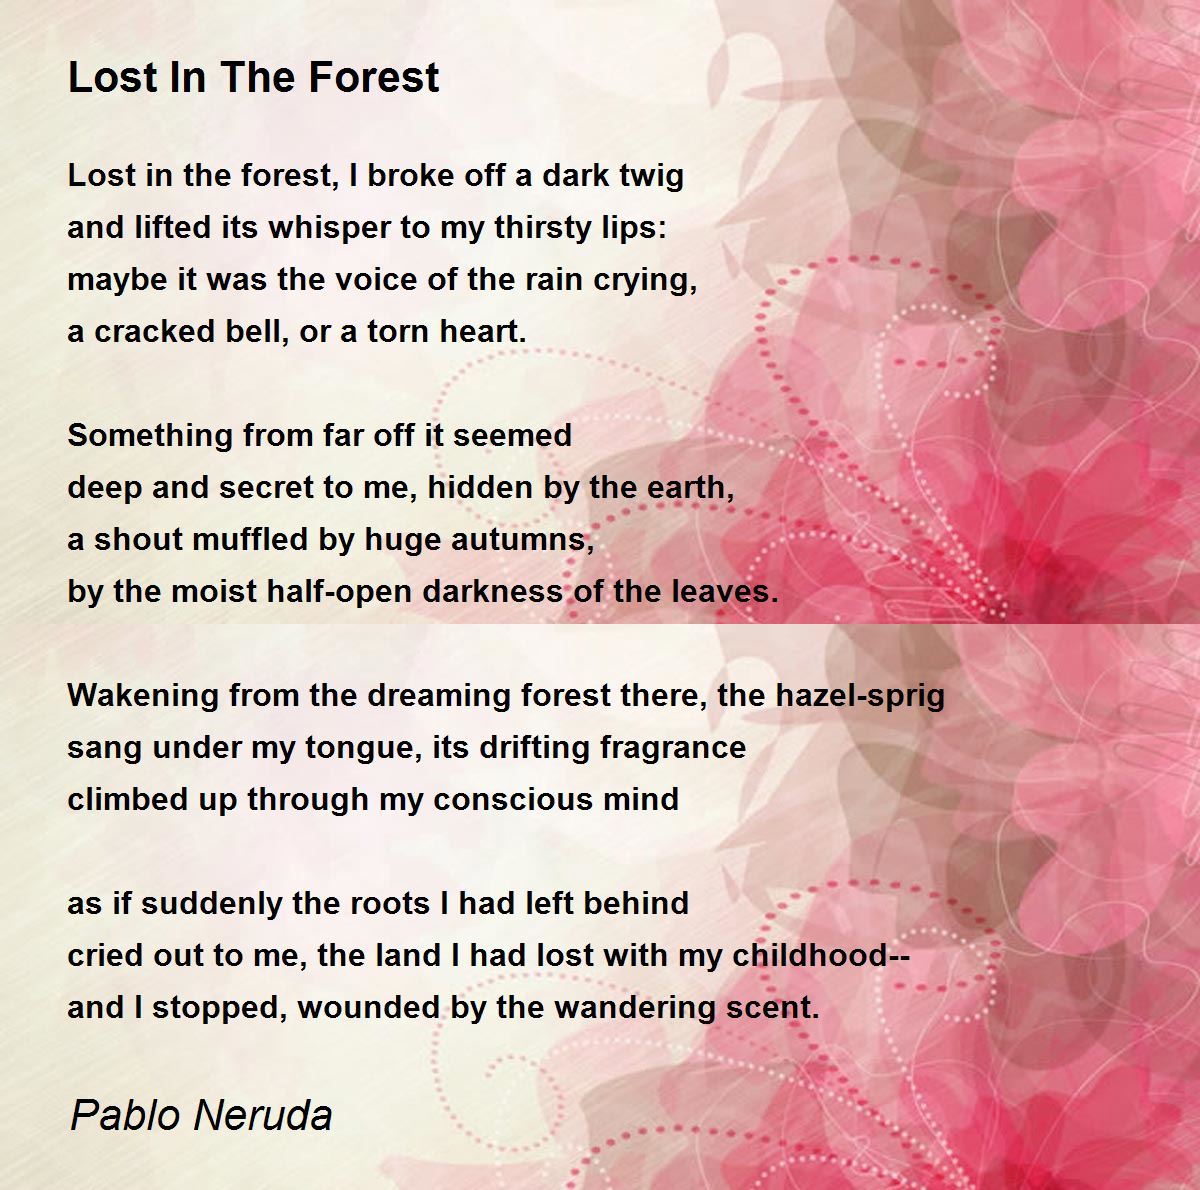 Lost In The Forest Poem by Pablo Neruda - Poem Hunter